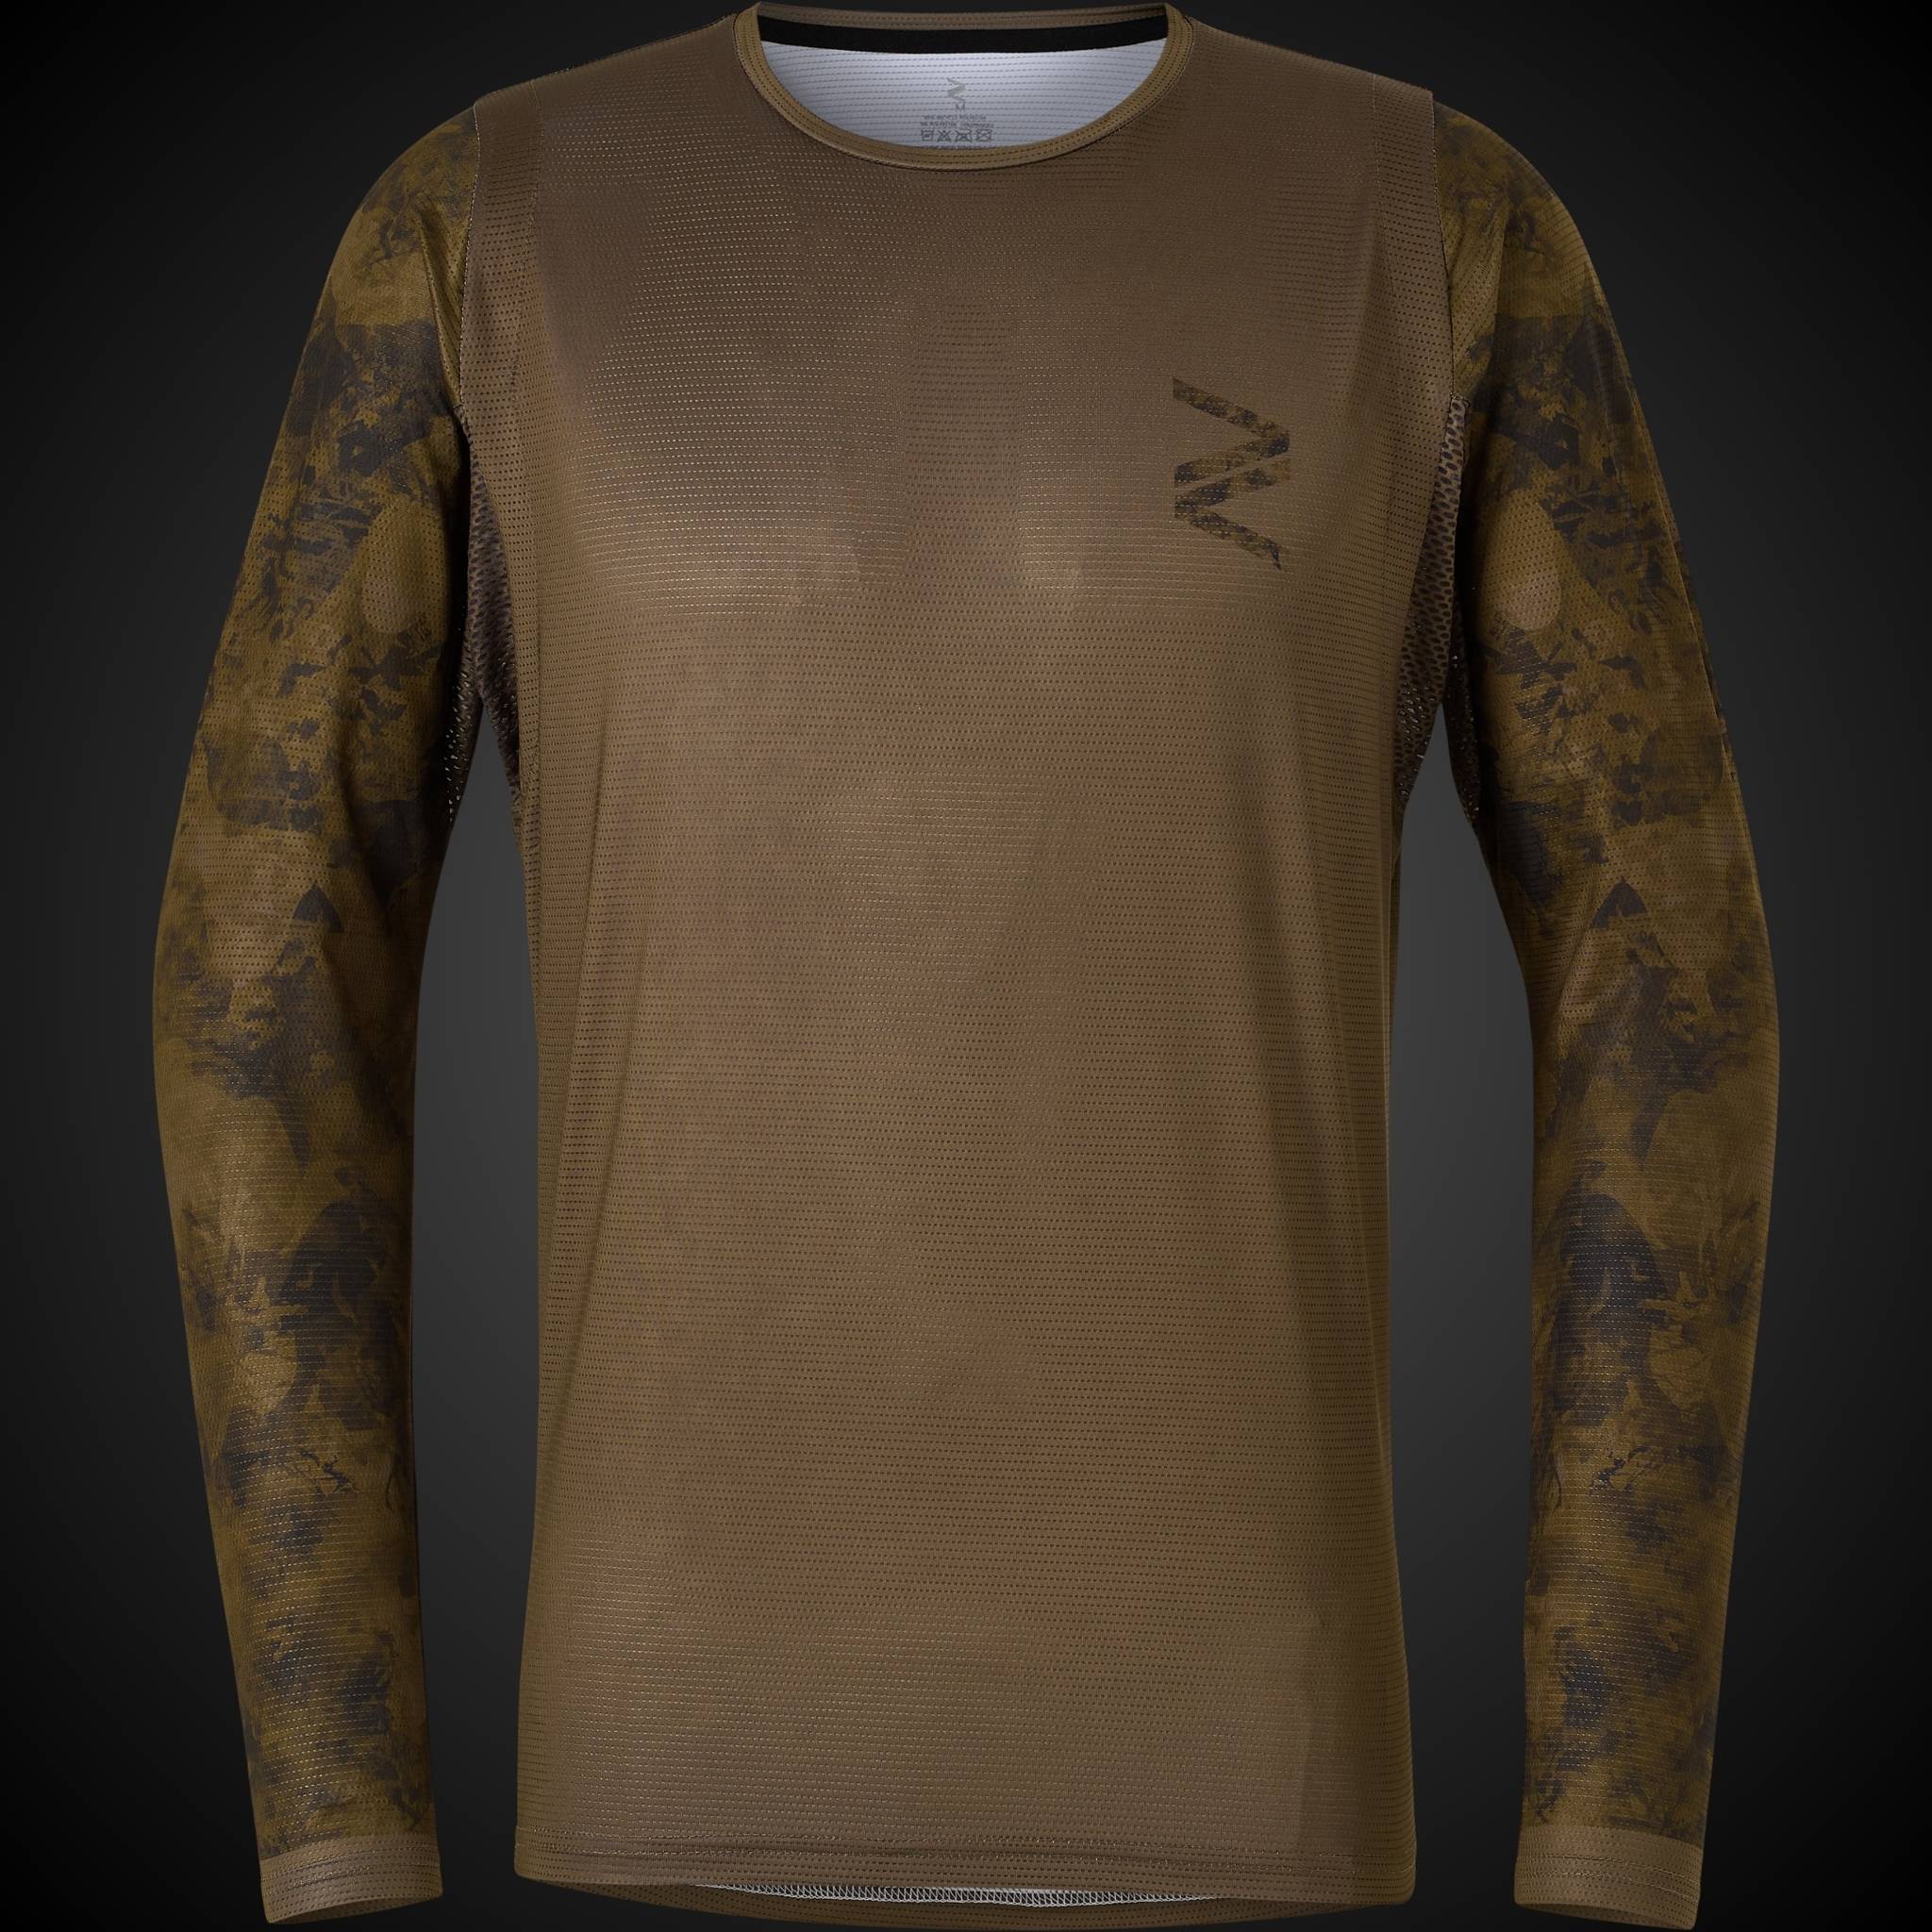 Khaki long-sleeve enduro mountain bike jersey, made with sustainable stretch fabric, ideal for downhill biking.